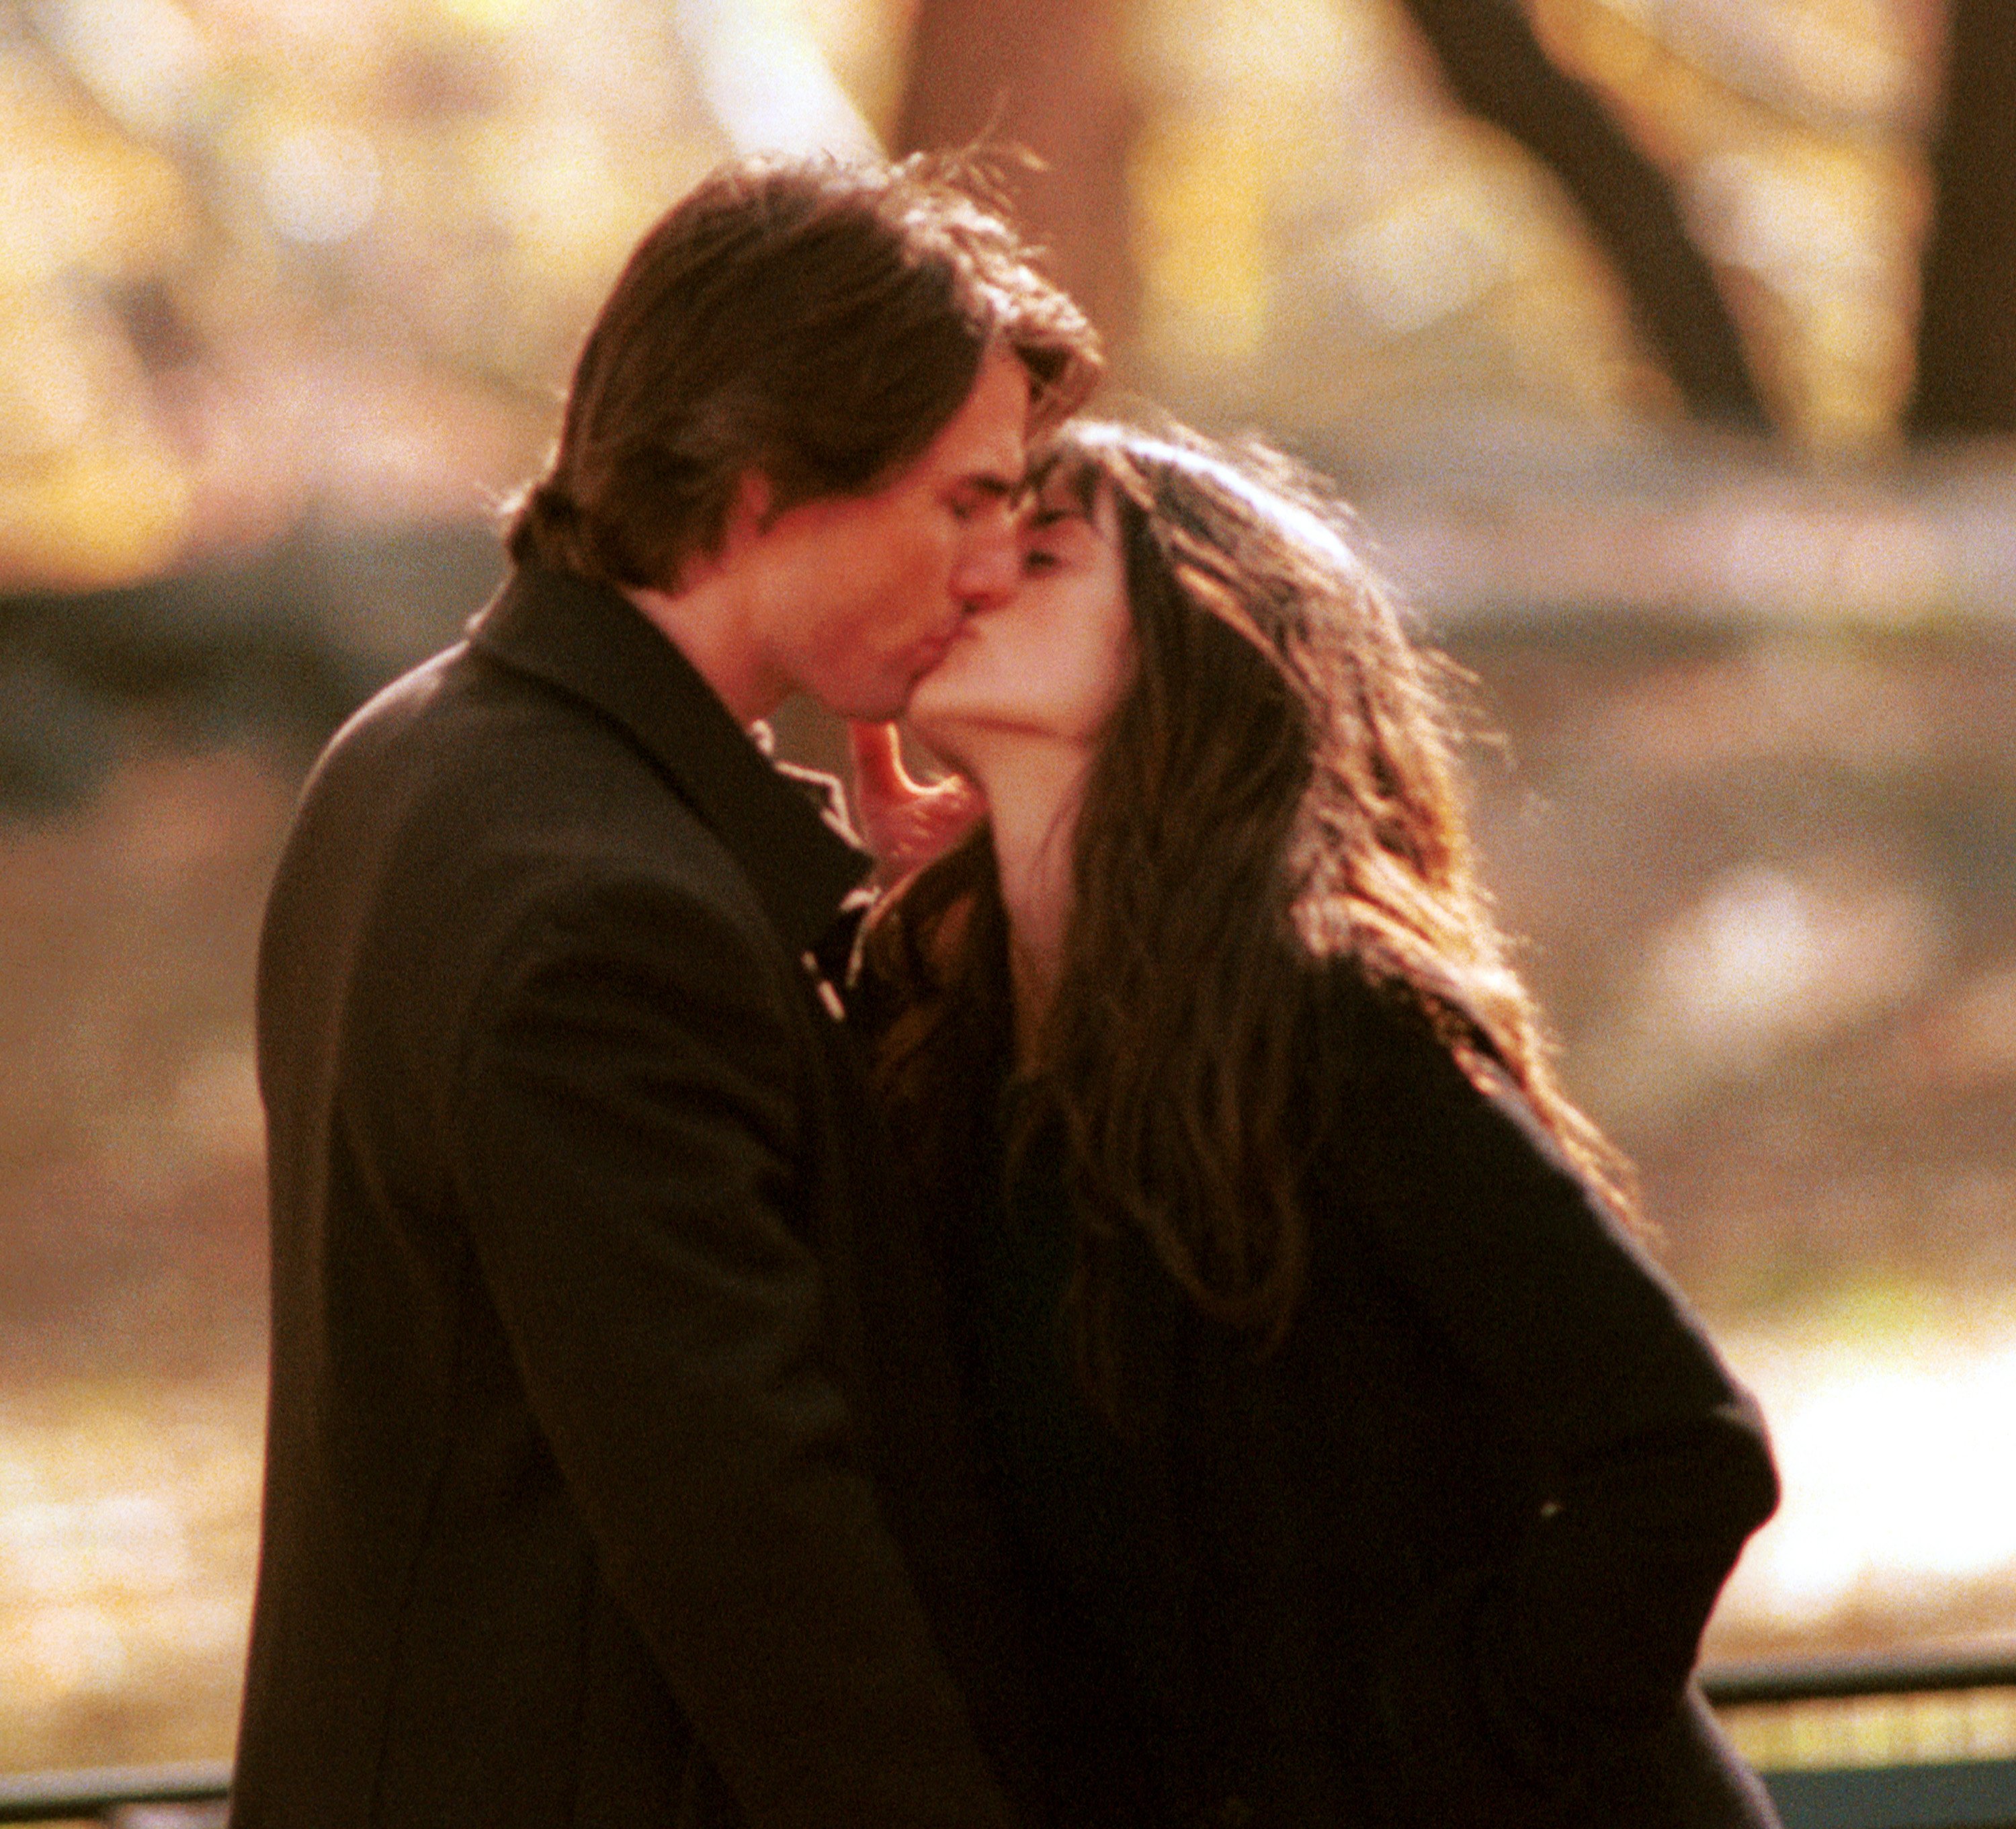  Actor Tom Cruise kisses co-star Penelope Cruz on the set of his new film "Vanilla Sky," during the first day of shooting November 6, 2000 in New York City''s Central Park. | Source: Getty Images